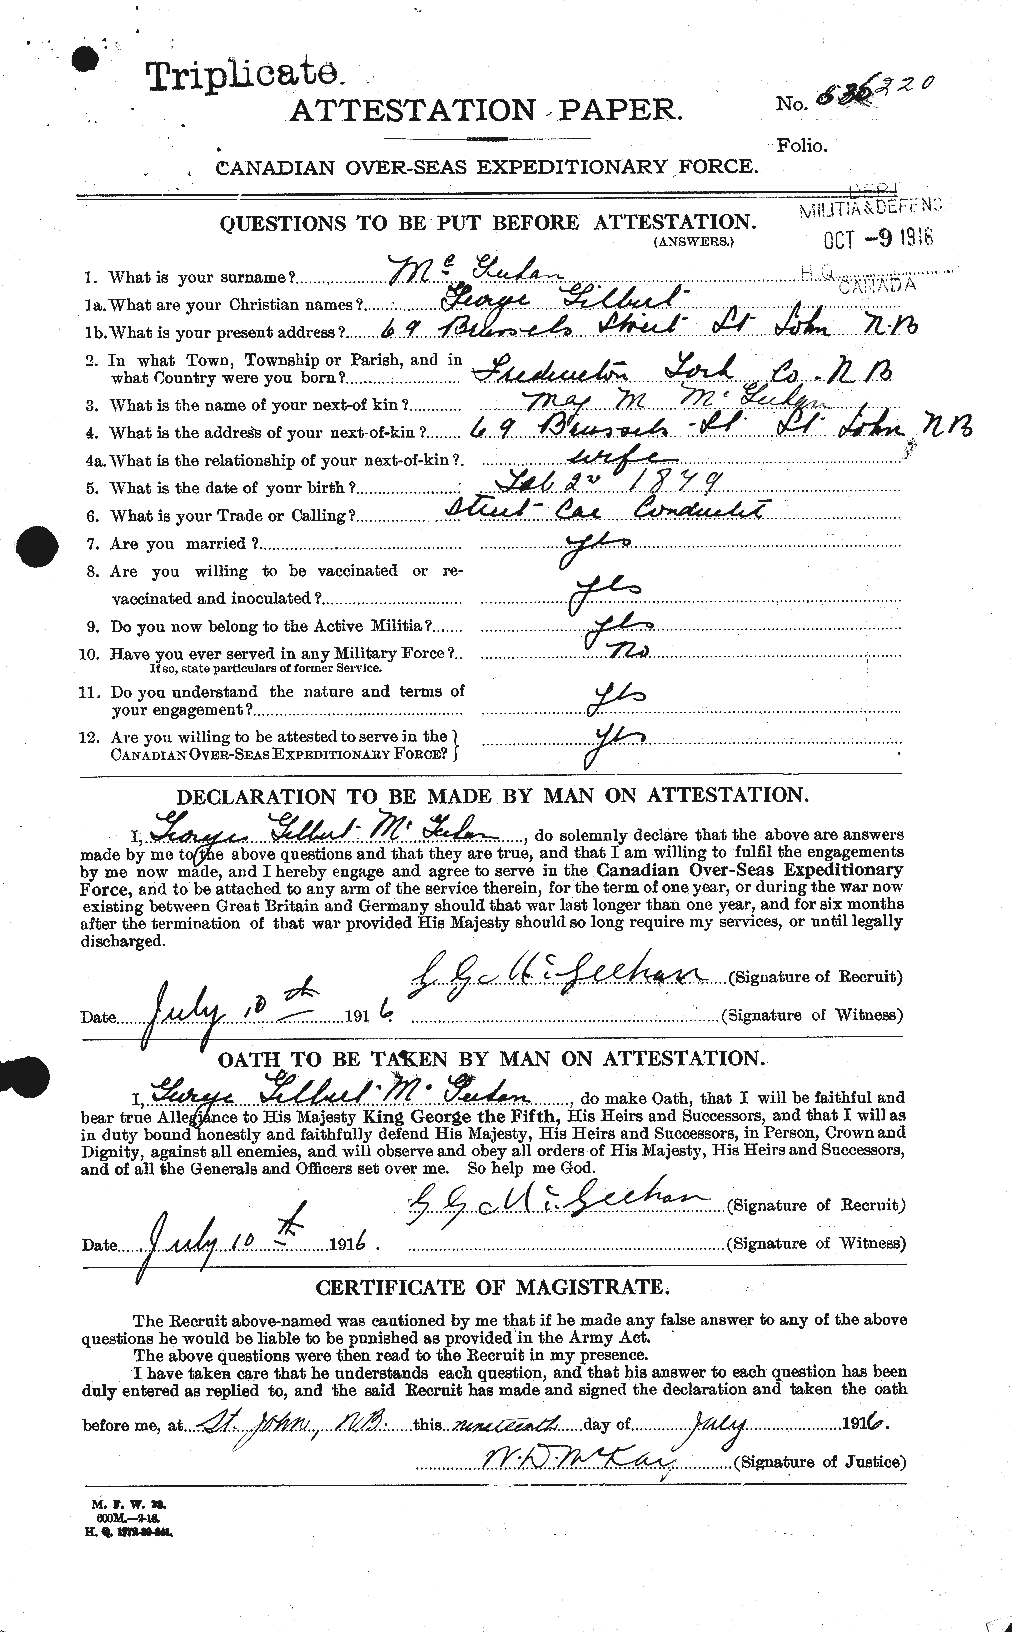 Personnel Records of the First World War - CEF 522412a